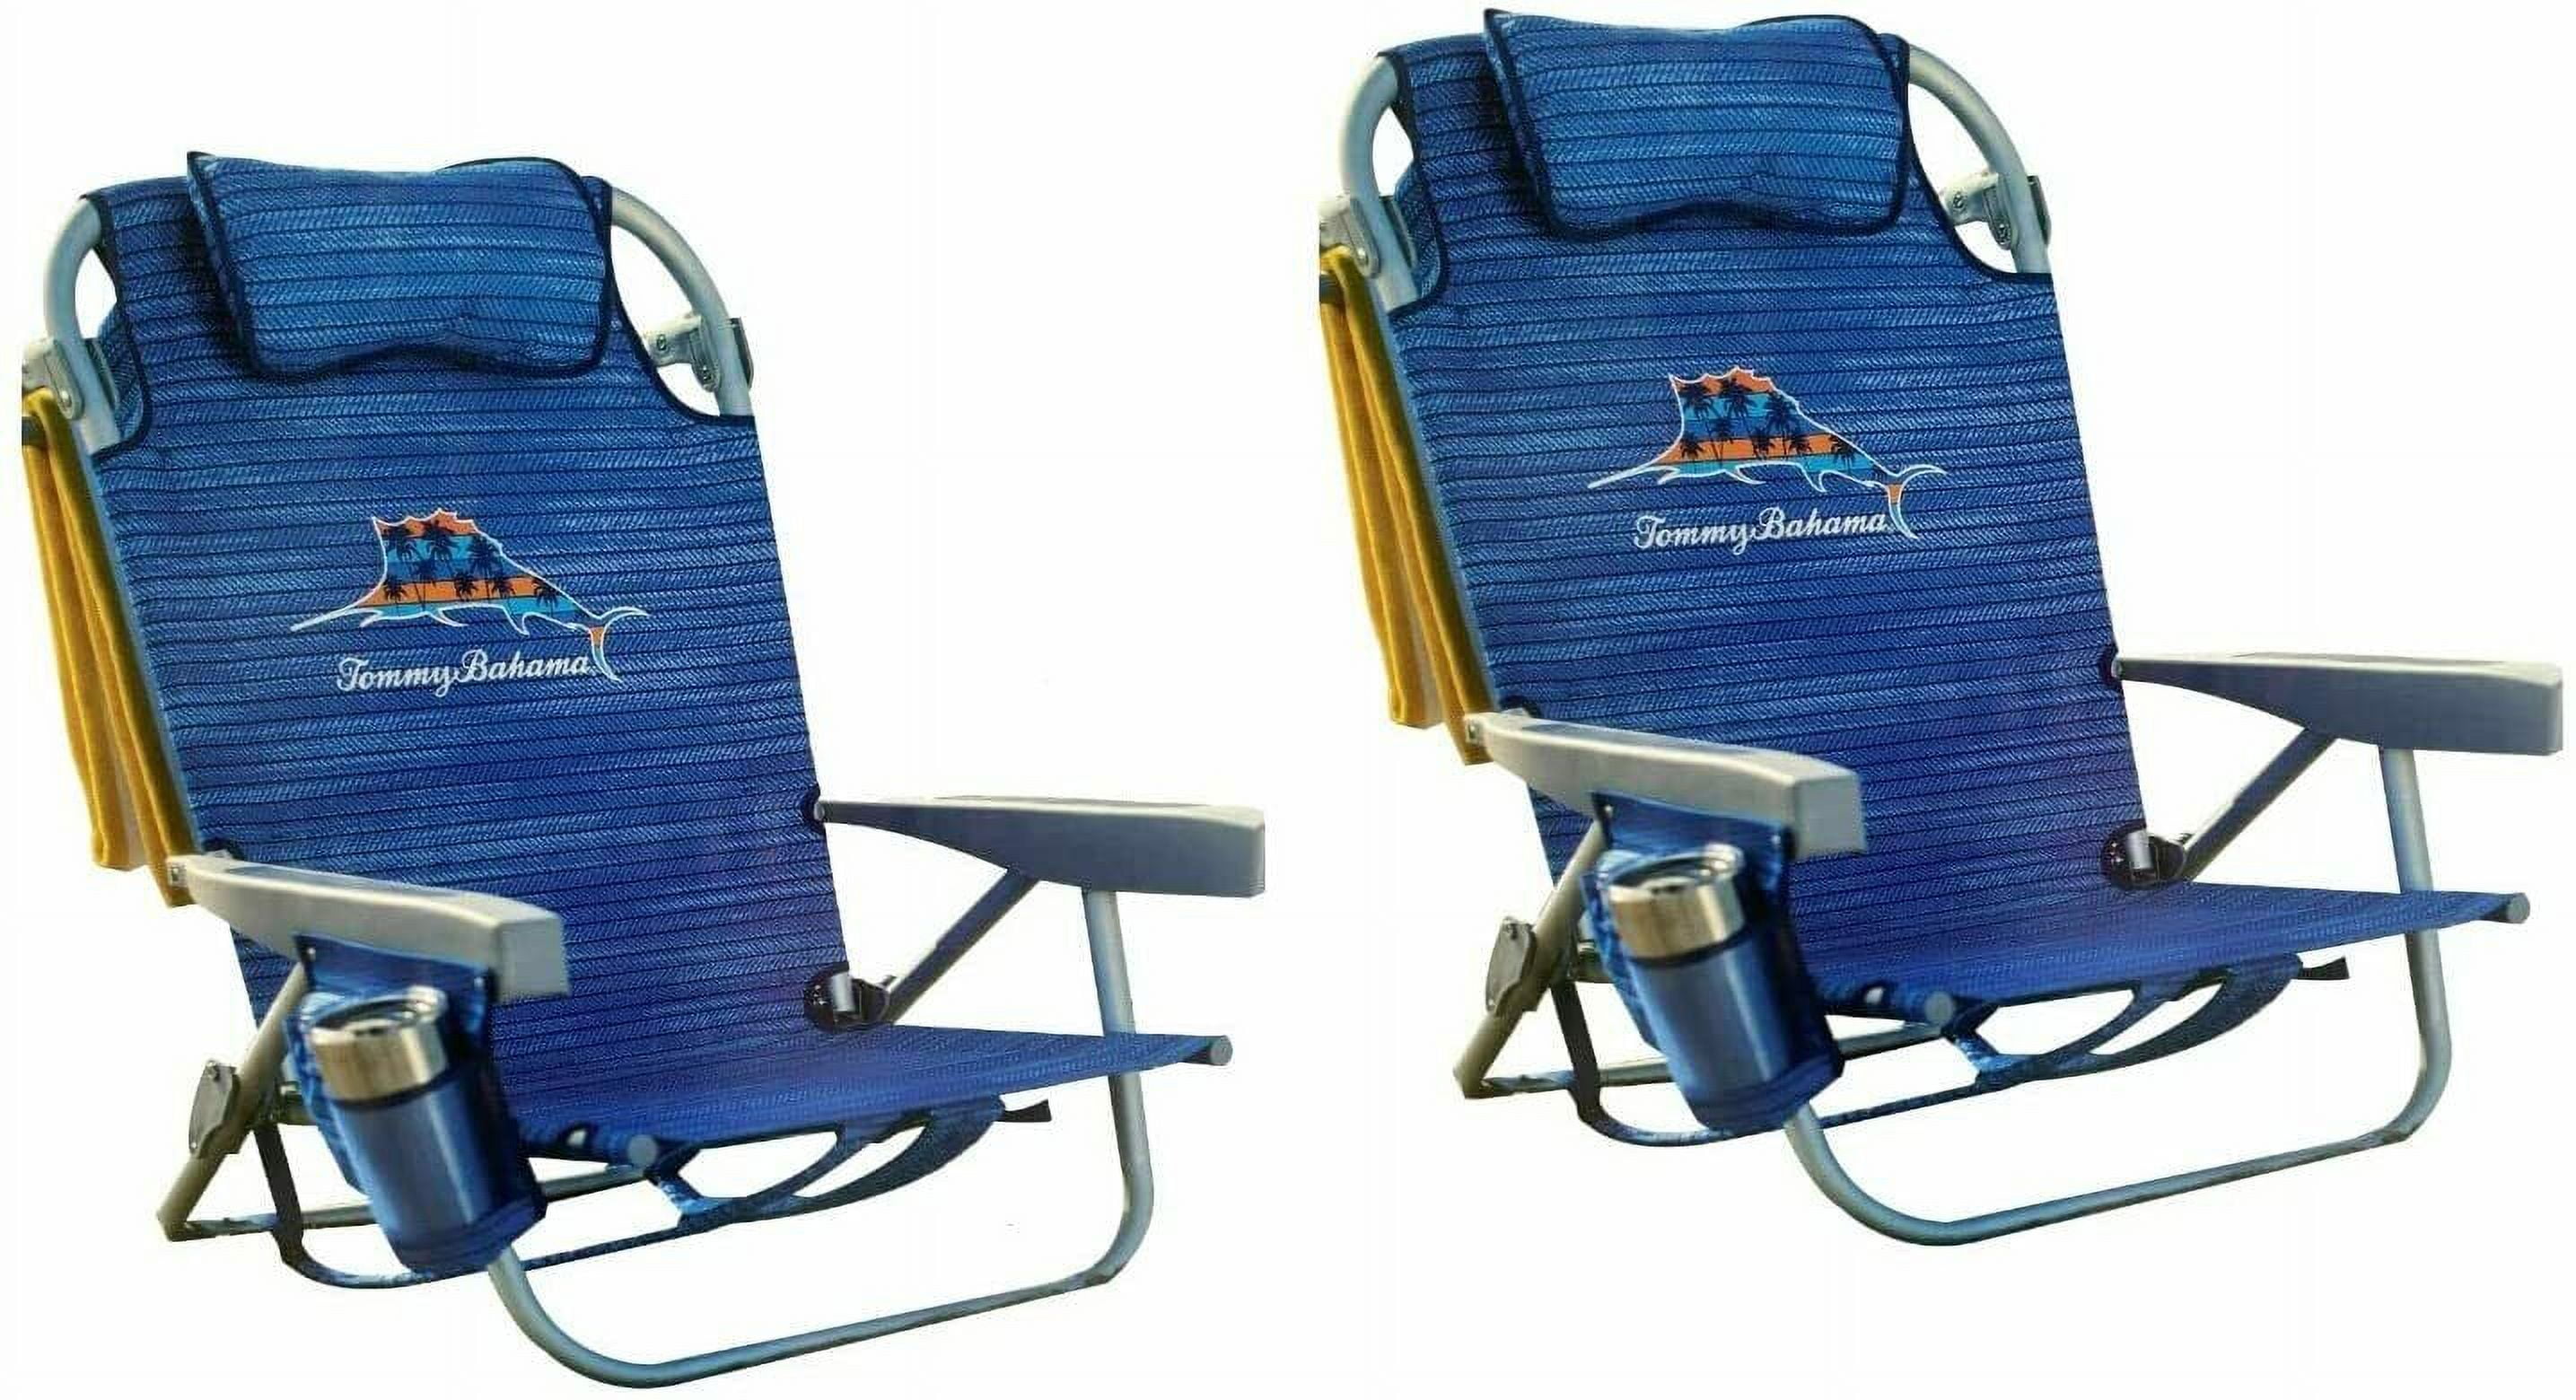 How to close Tommy Bahama beach chairs 